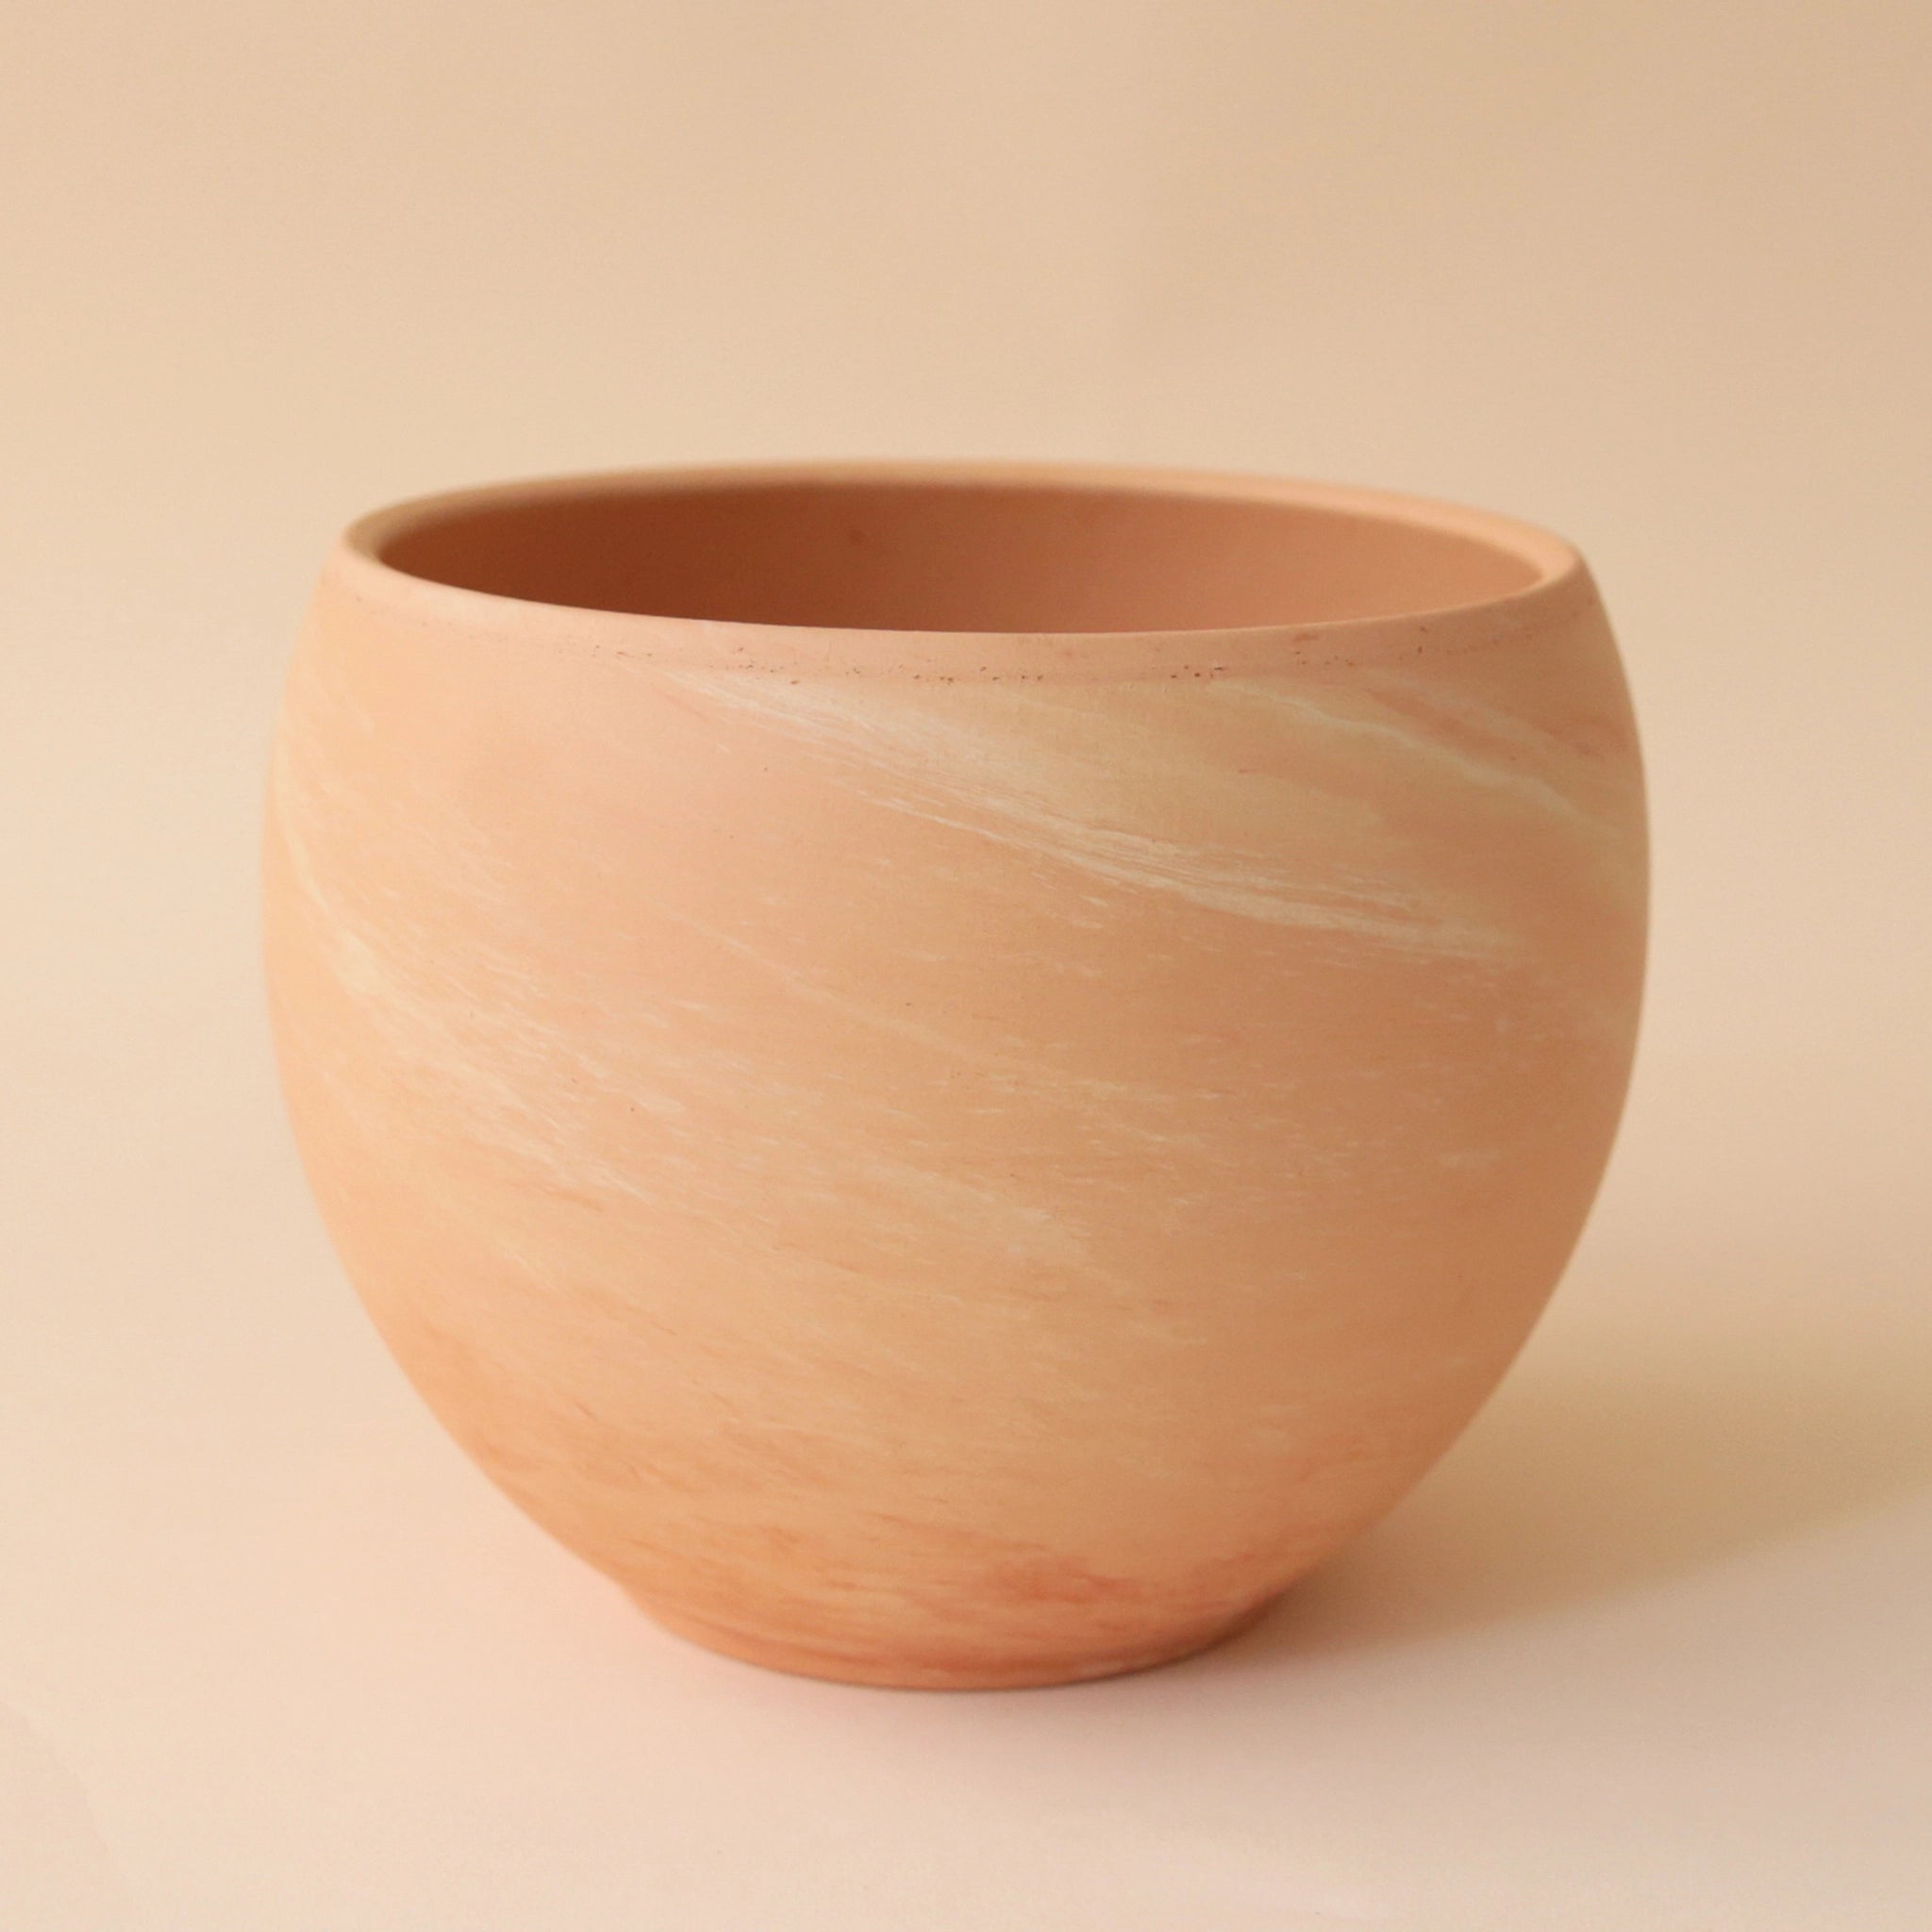 On a peach background is a terracotta circle planter.